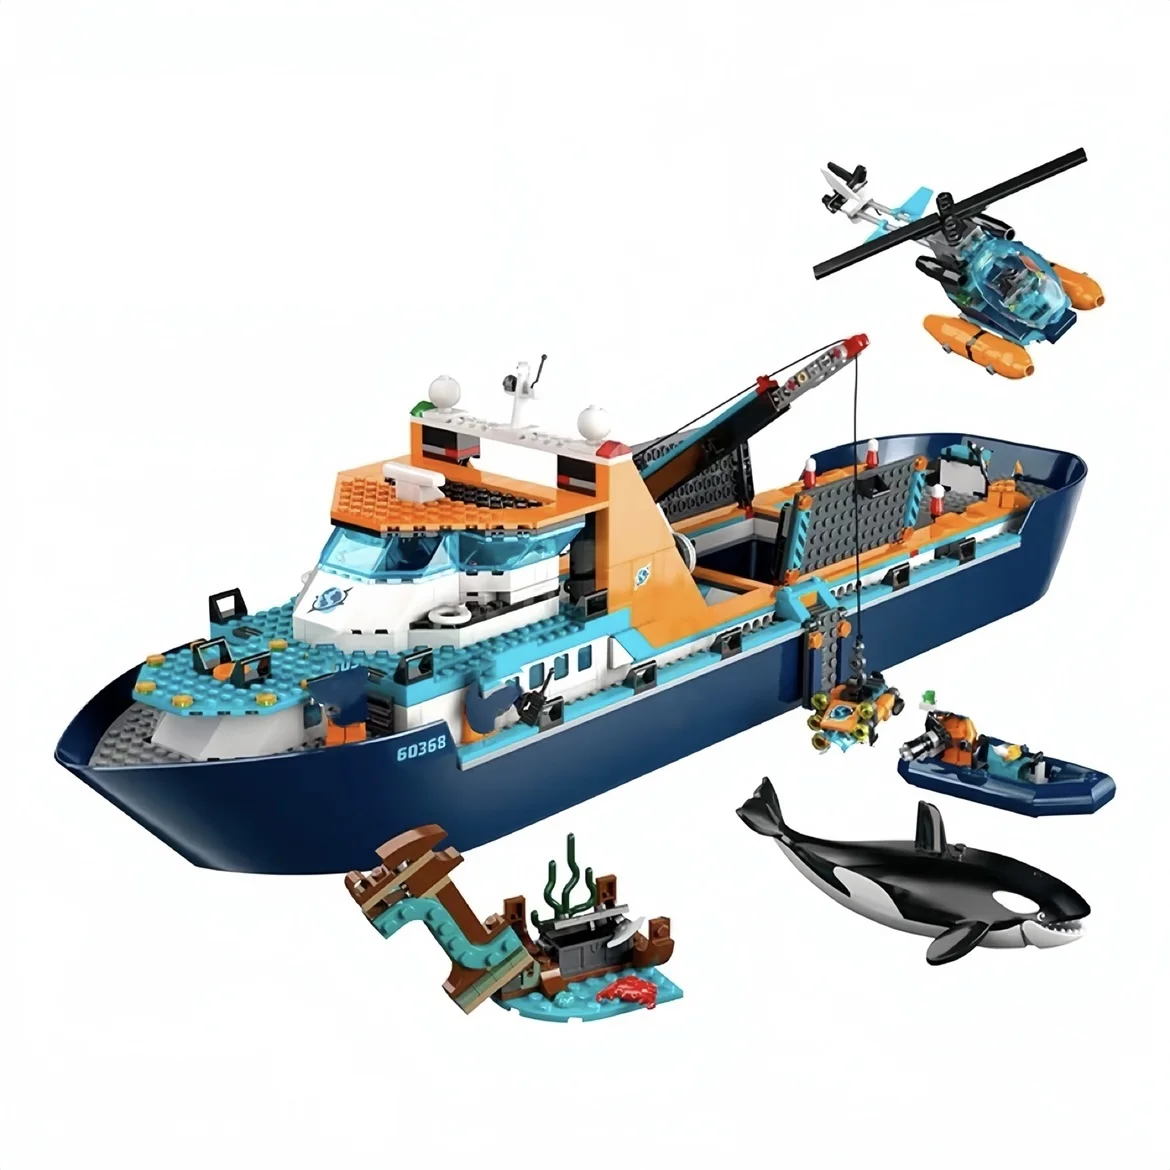 

Arctic Explorer Ship Compatible 60368 City Building Block Toys for Boys Girls Floatable Boat Bricks ROV Sub Constructor Gifts